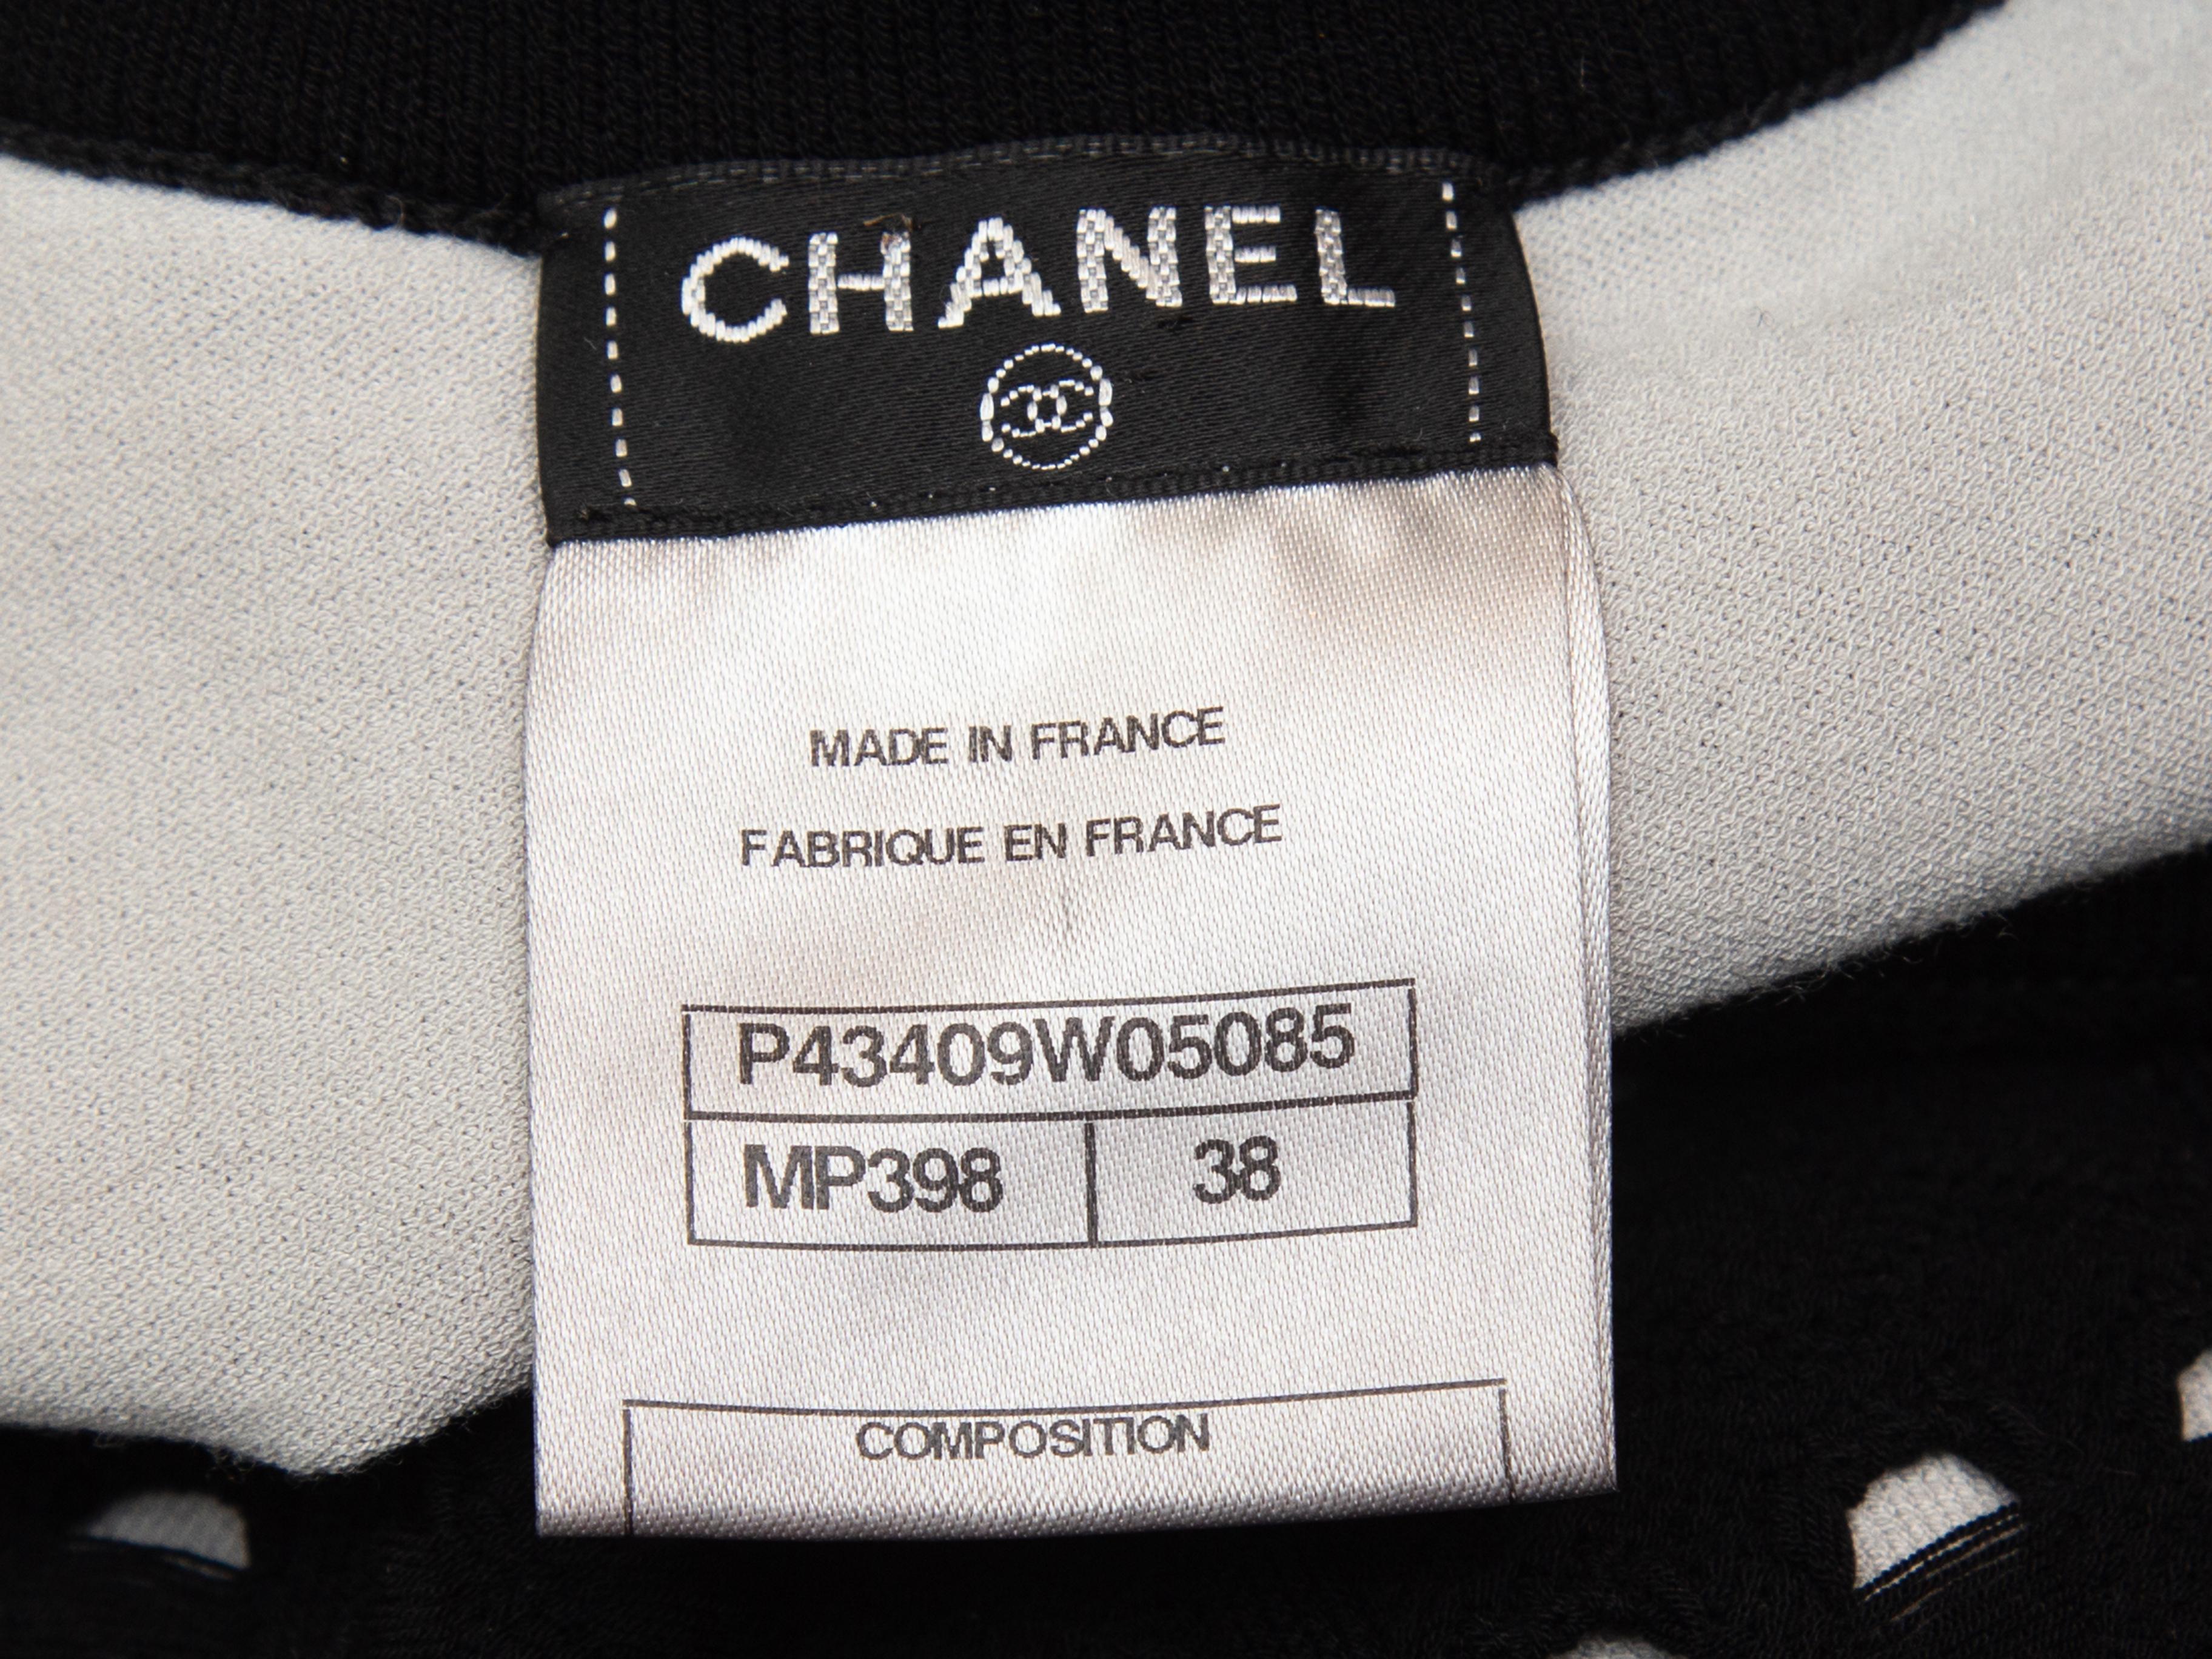 Product details: Black open knit sleeveless dress by Chanel. Crew neck. Designer size 38. 32